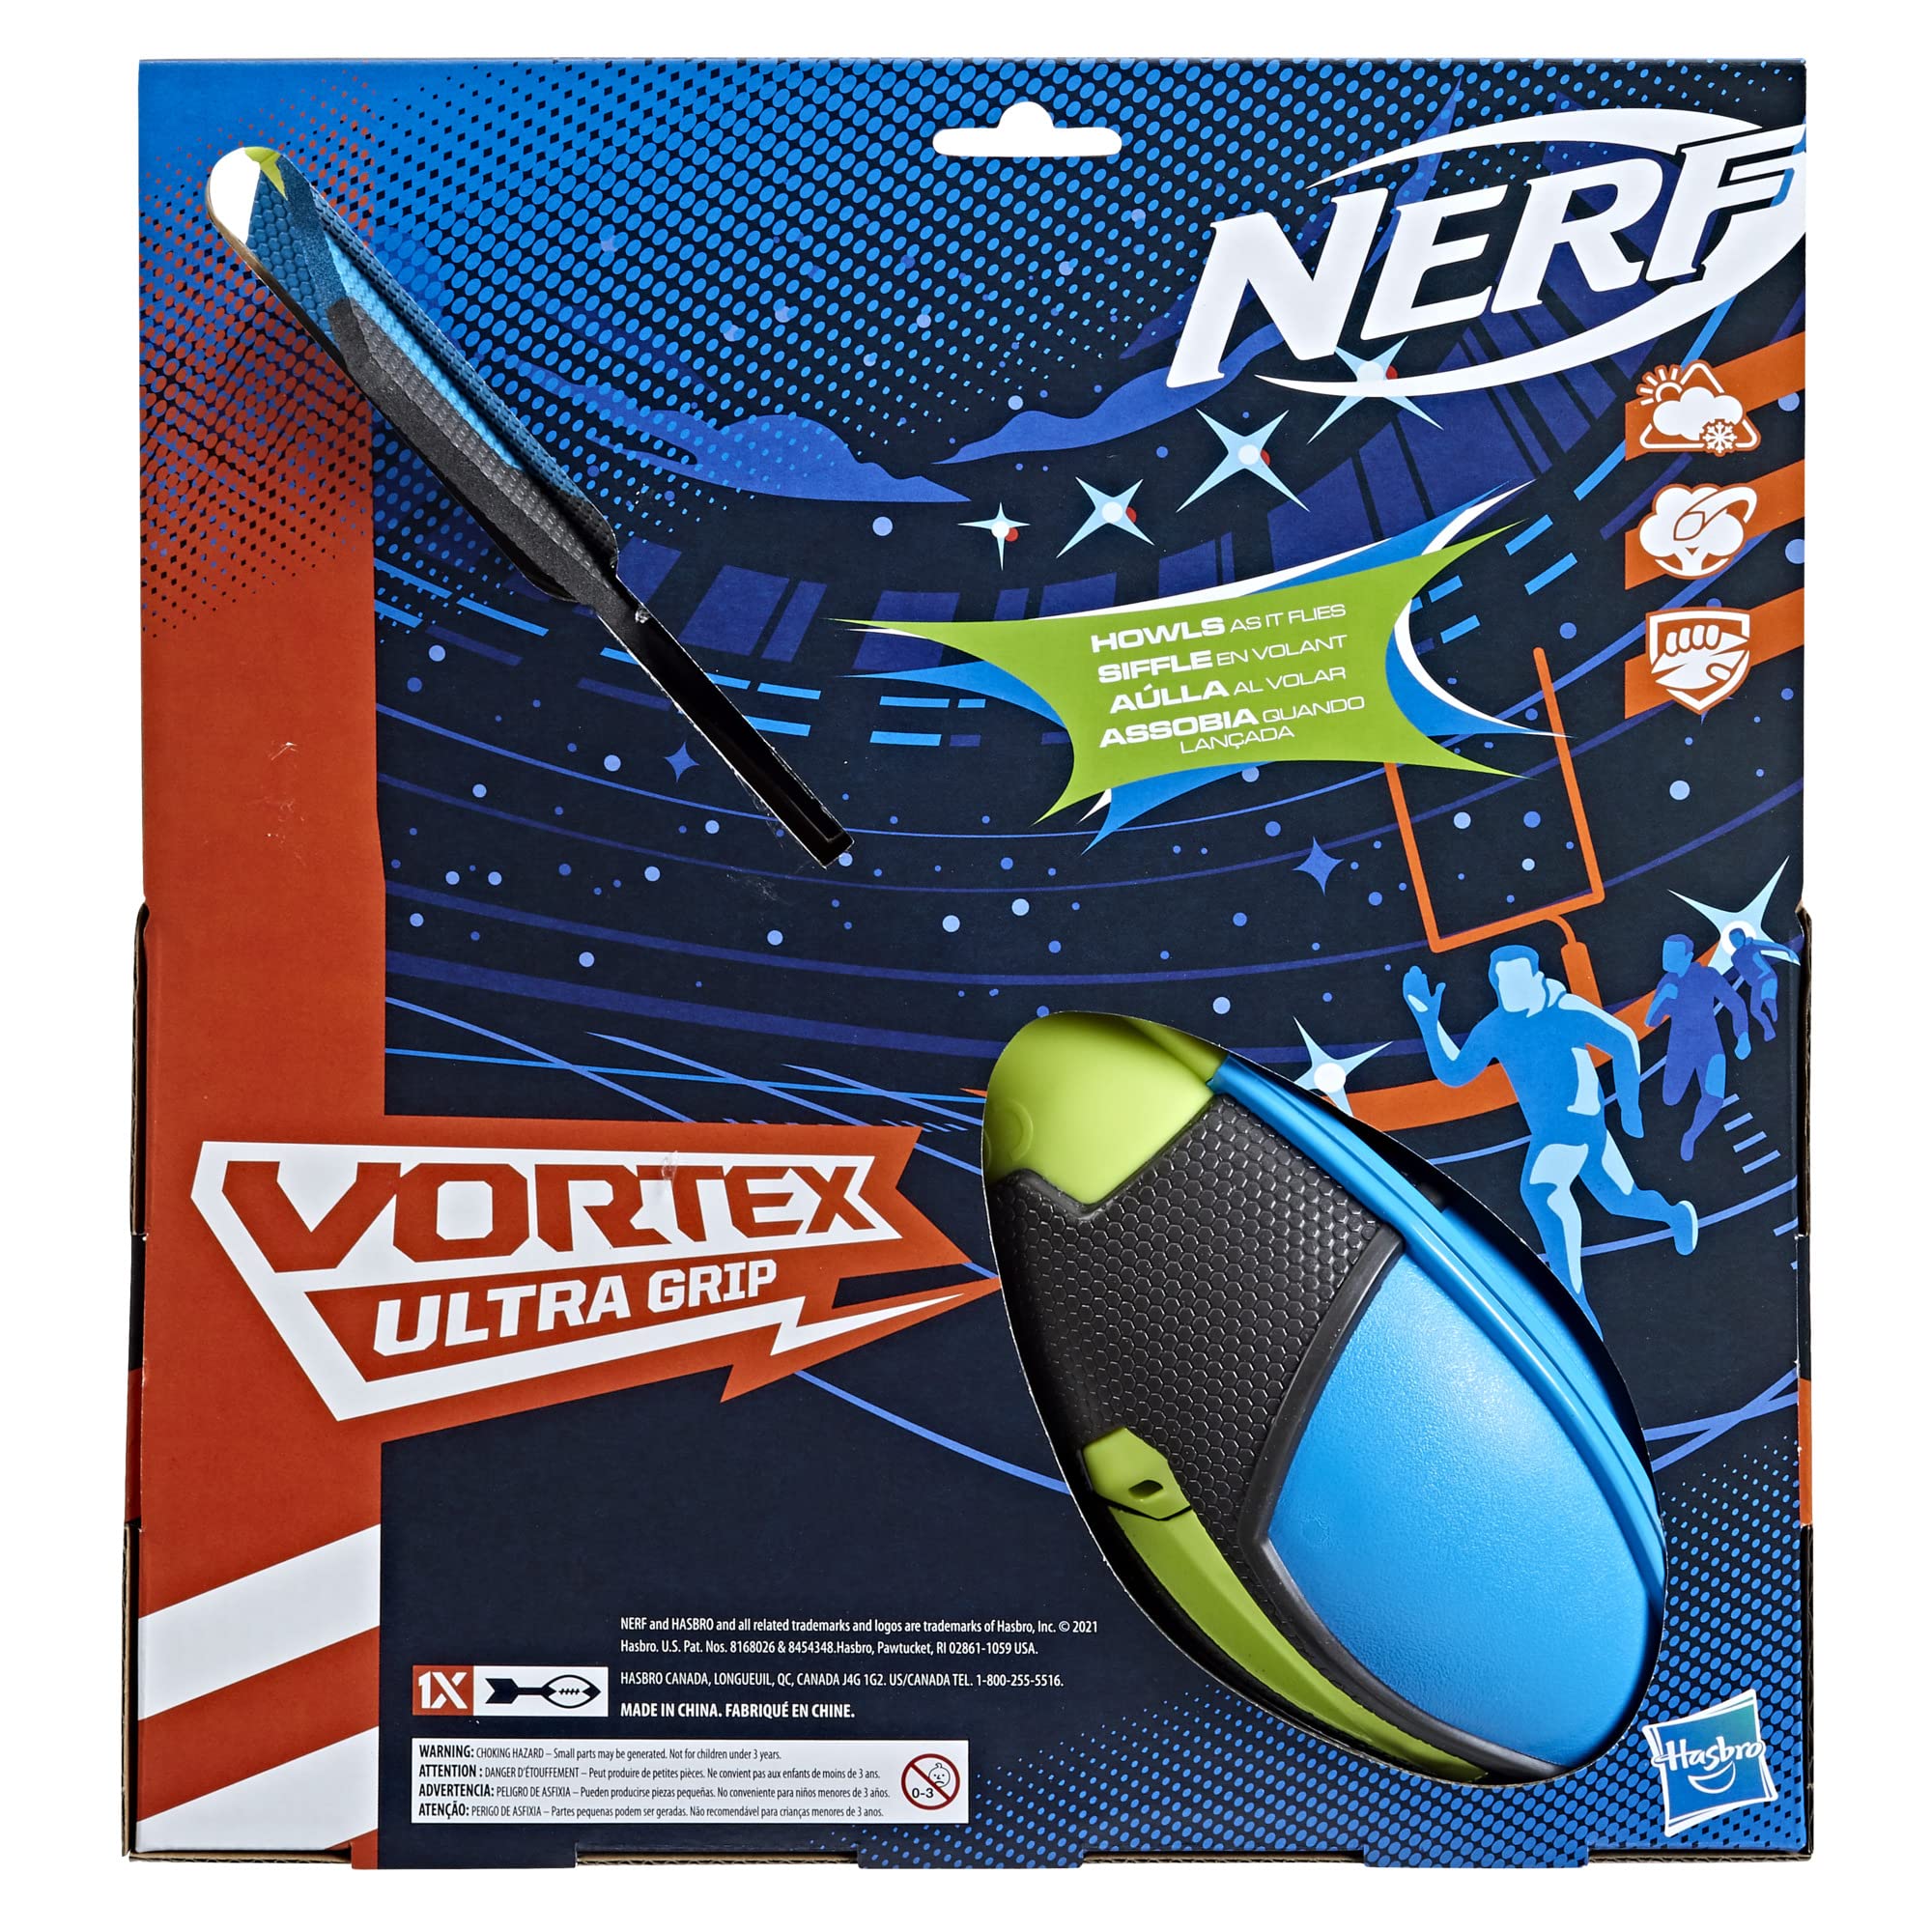 NERF Vortex Ultra Grip Football, Designed for Easy Catching, Howling Whistle Sound, Distance-Optimizing Tail, Water-Resistant, All-Weather Play